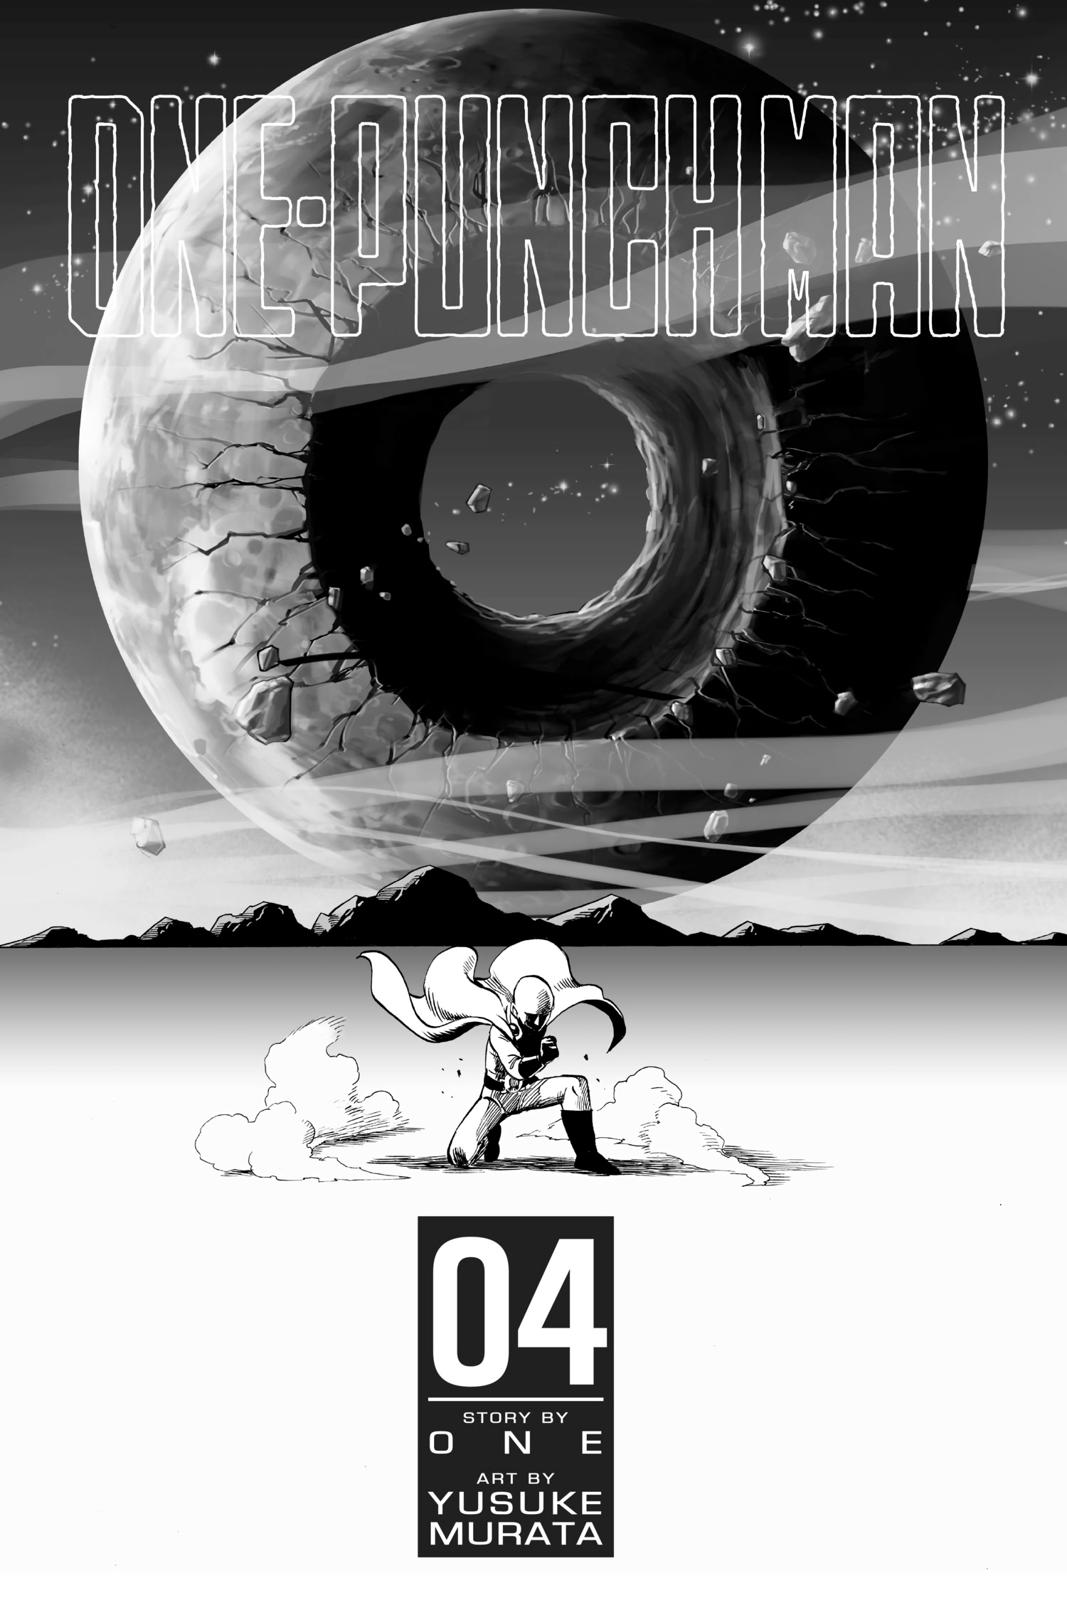 One-Punch Man, Punch 21 image 04